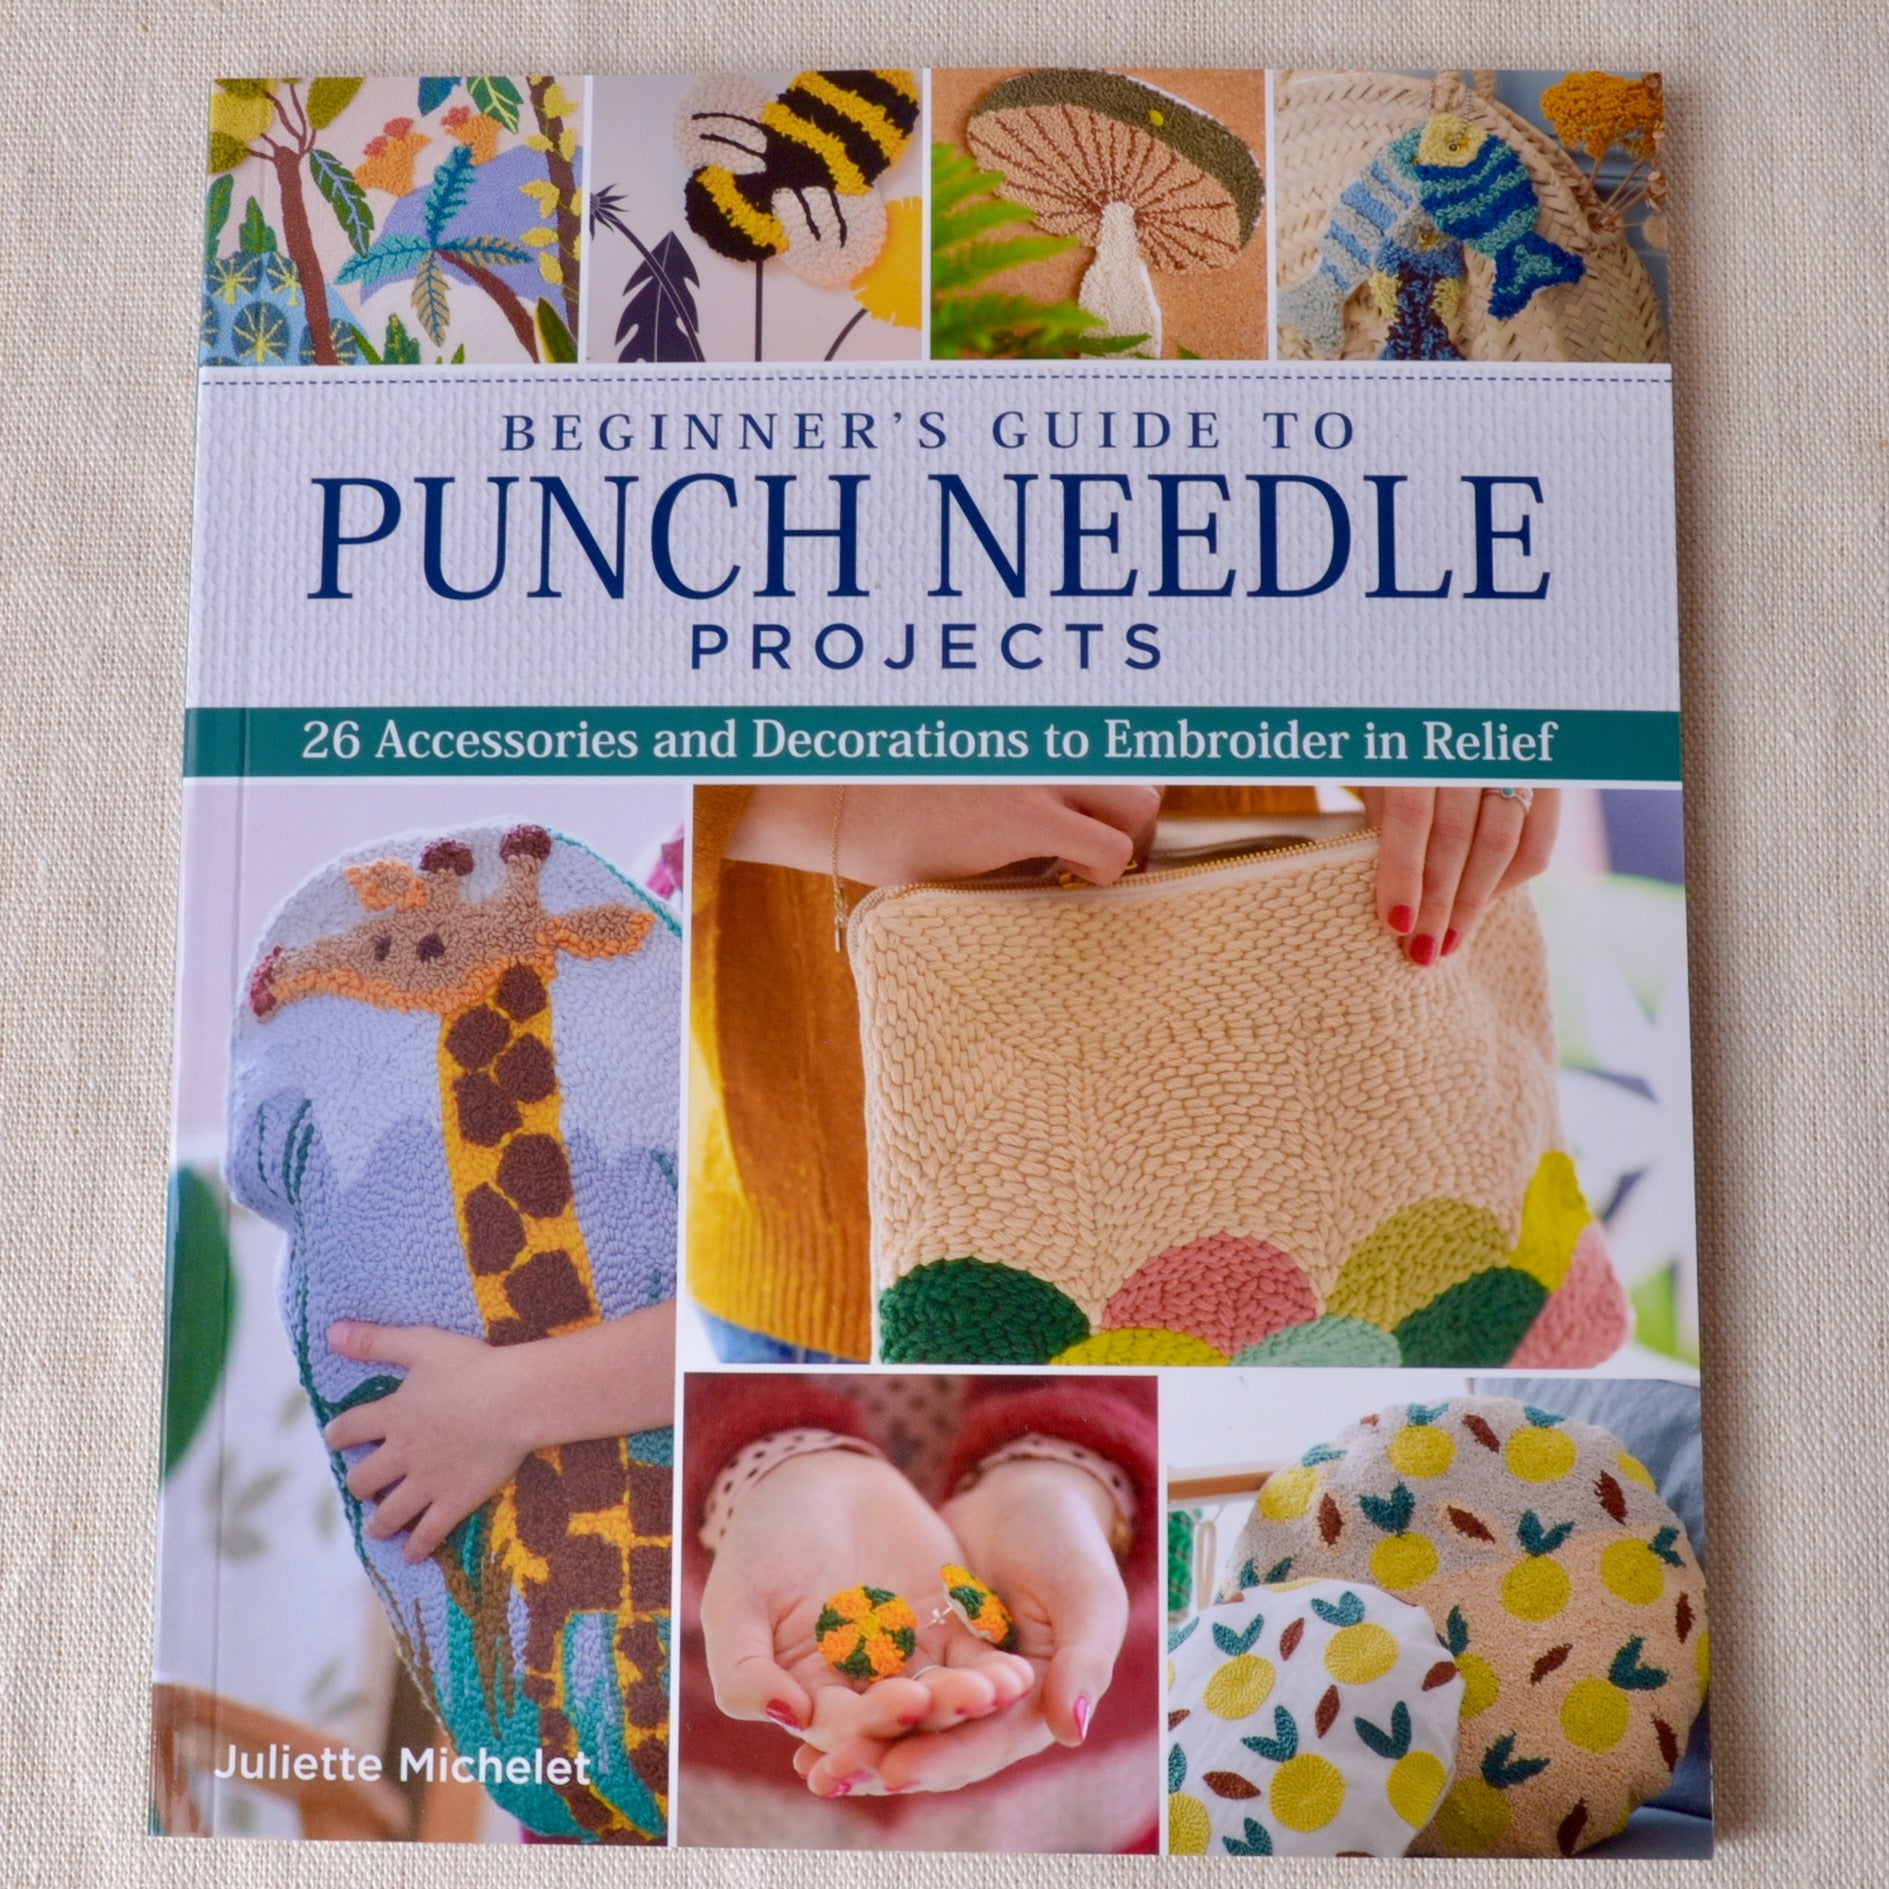 Beginner's Guide to Punch Needle Projects - A Threaded Needle